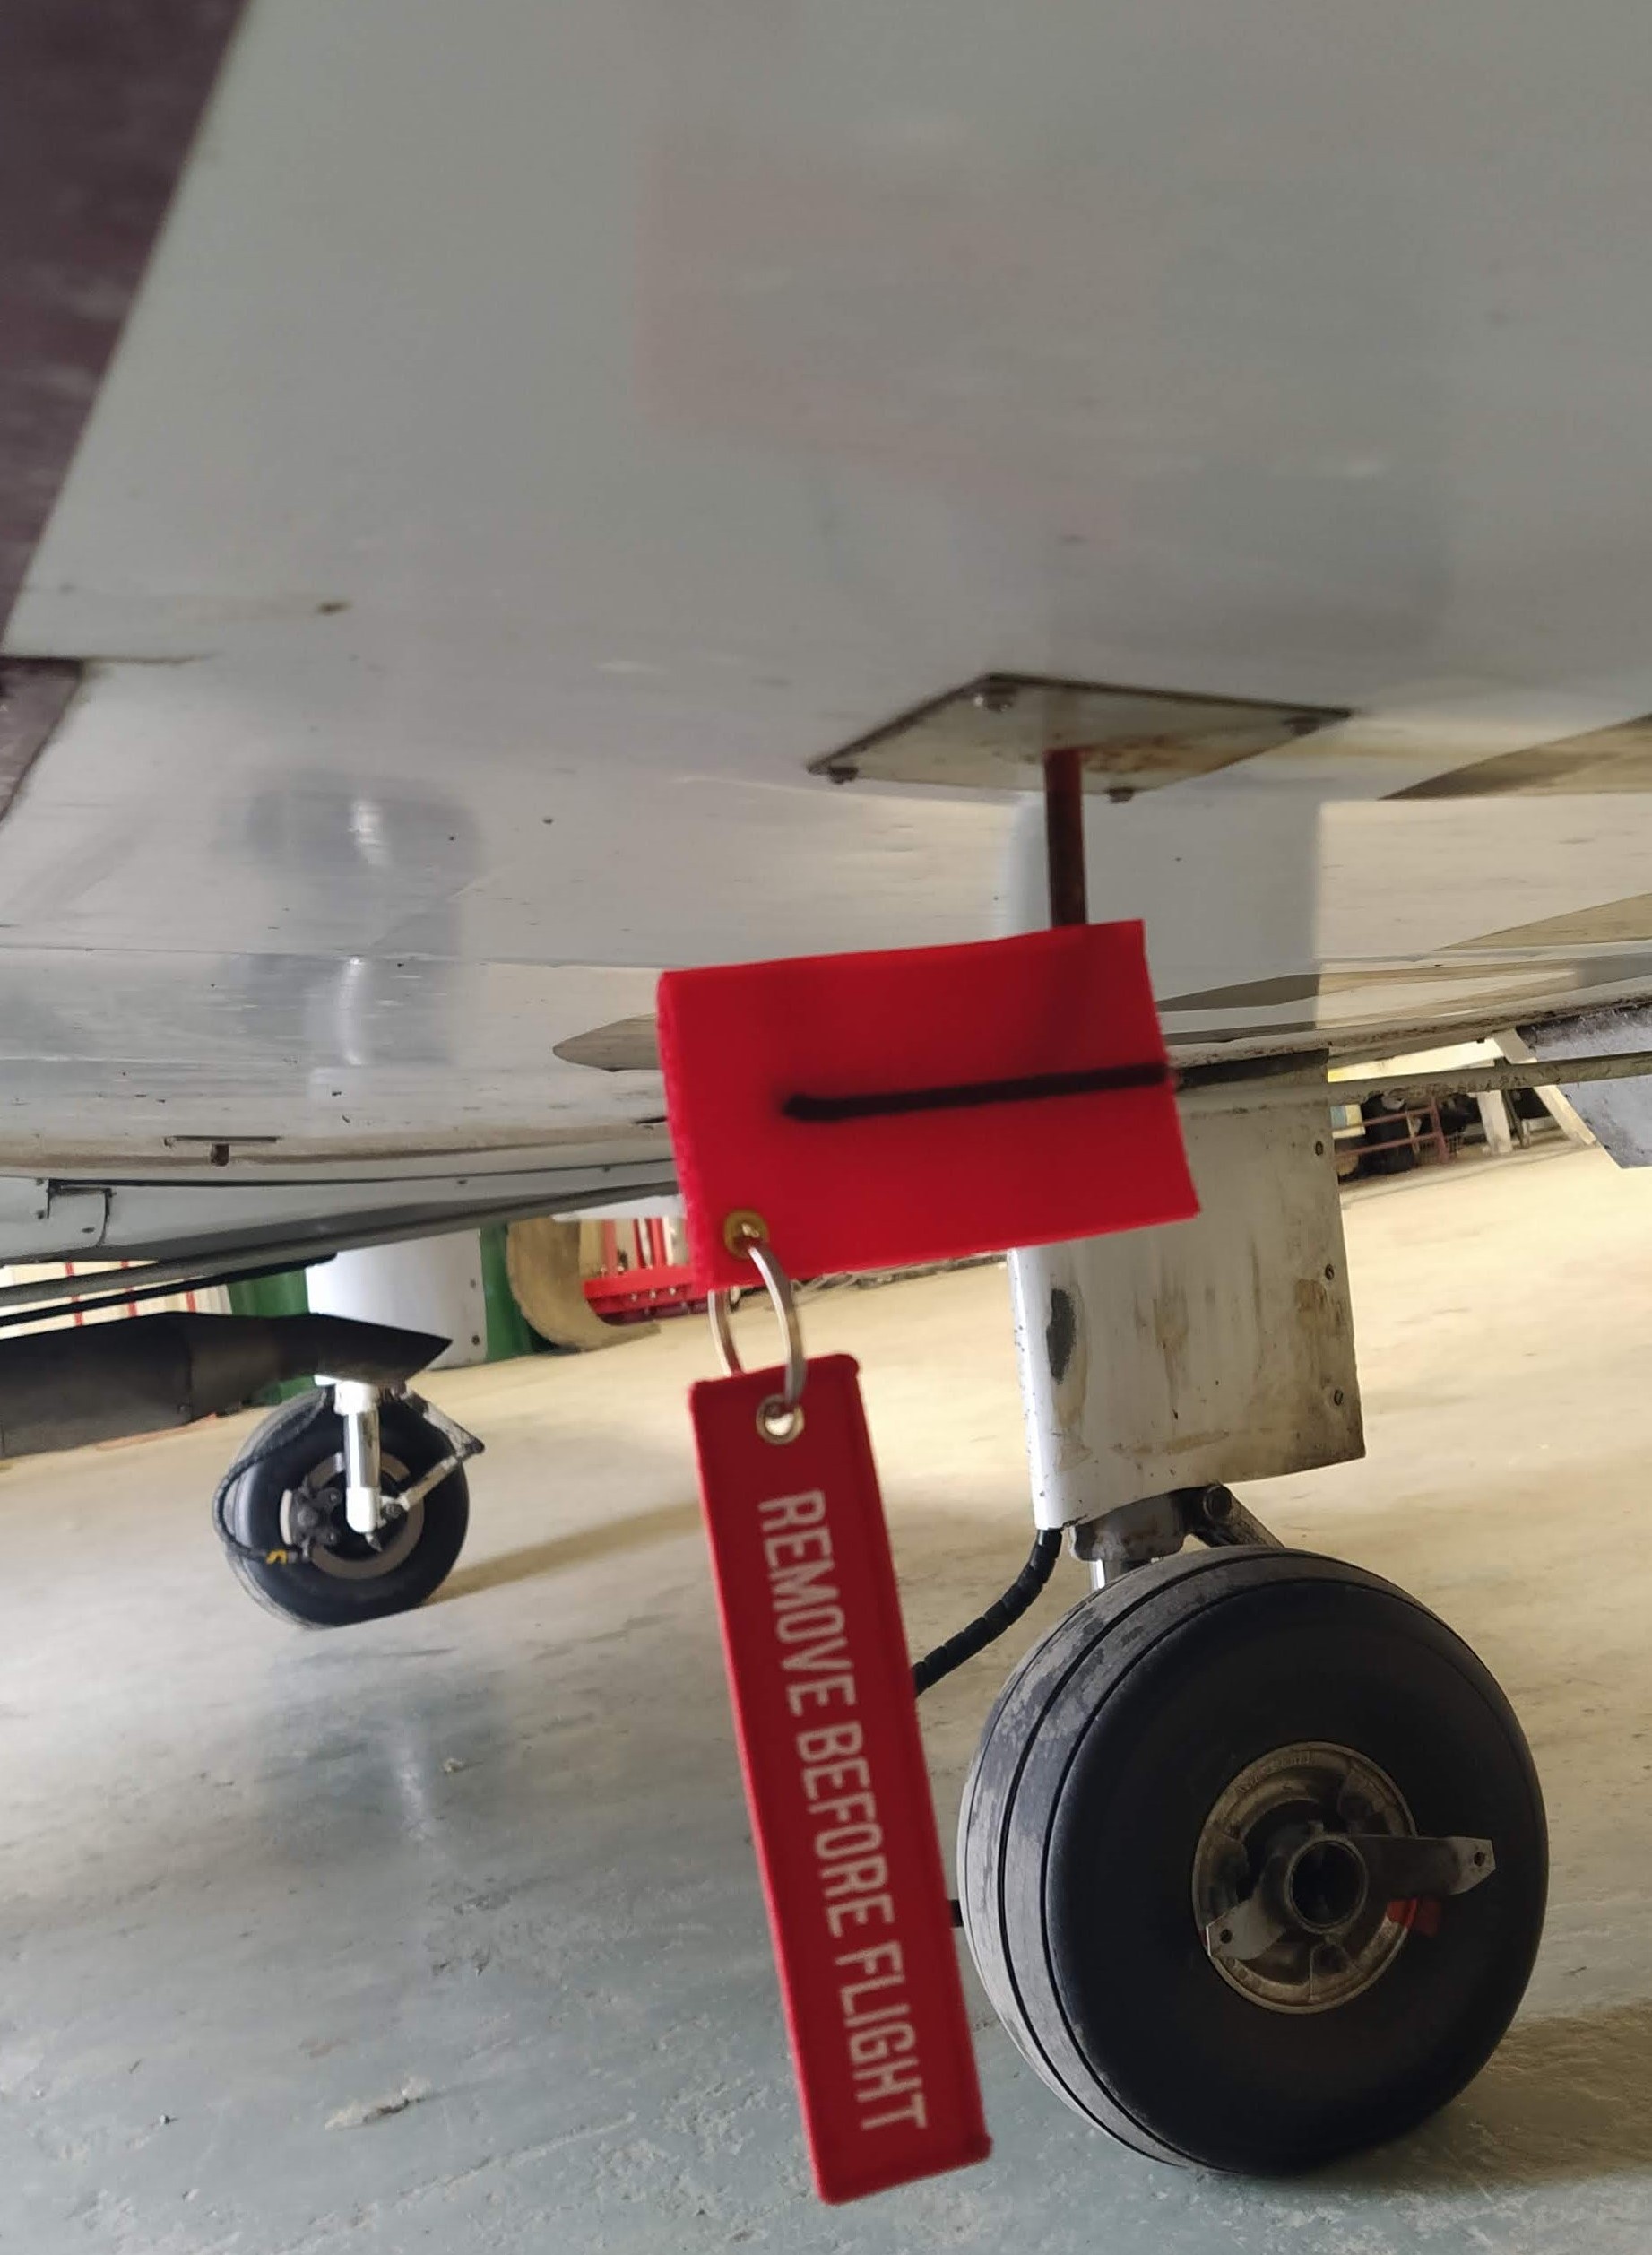 What Are The Remove Before Flight Tags On The Aircraft For